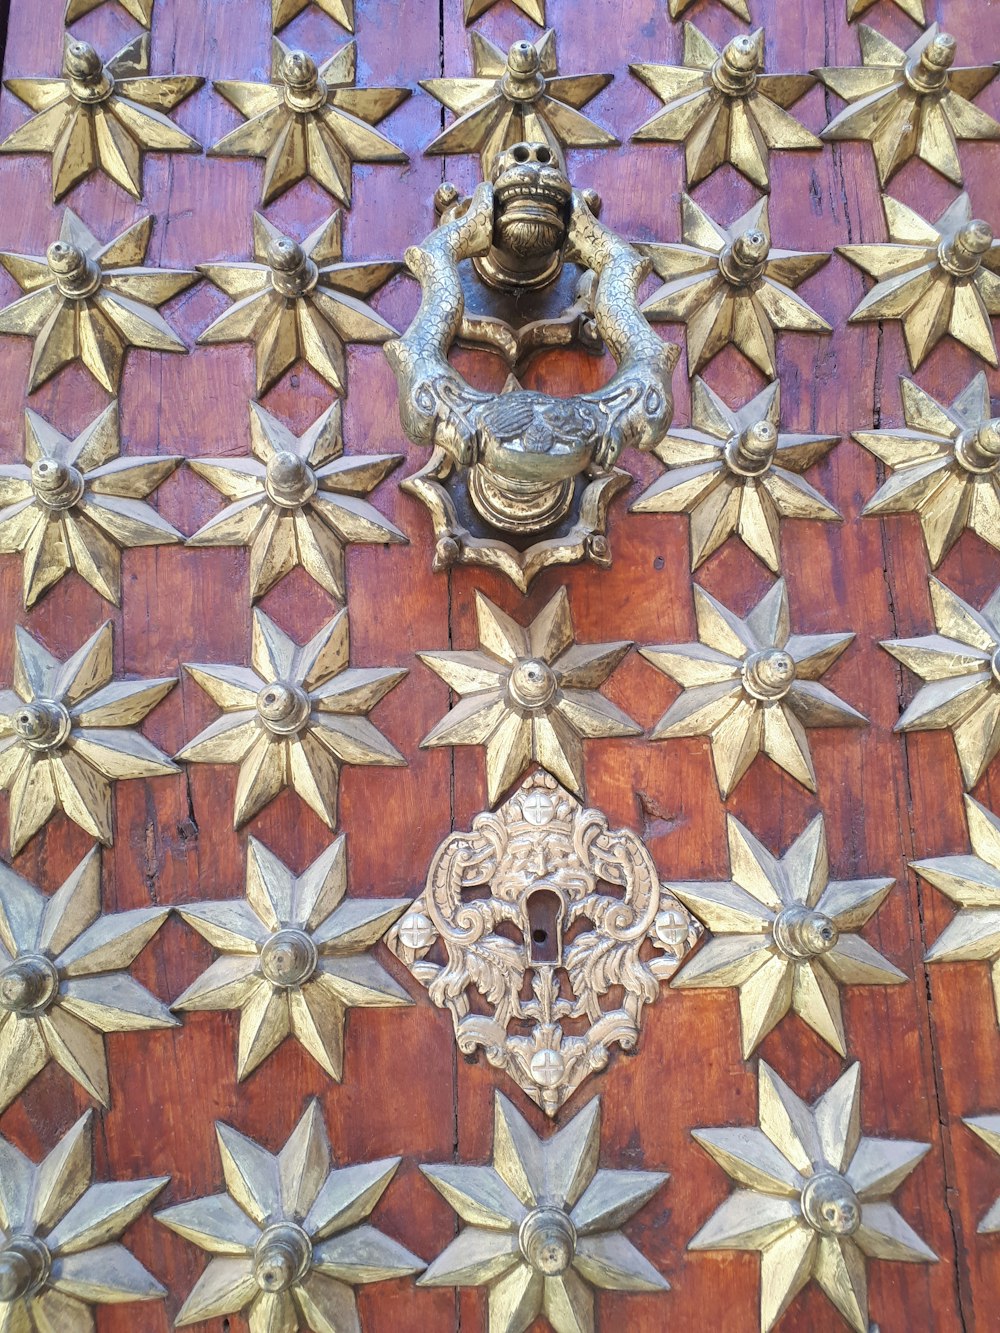 a close up of a wooden door with metal decorations